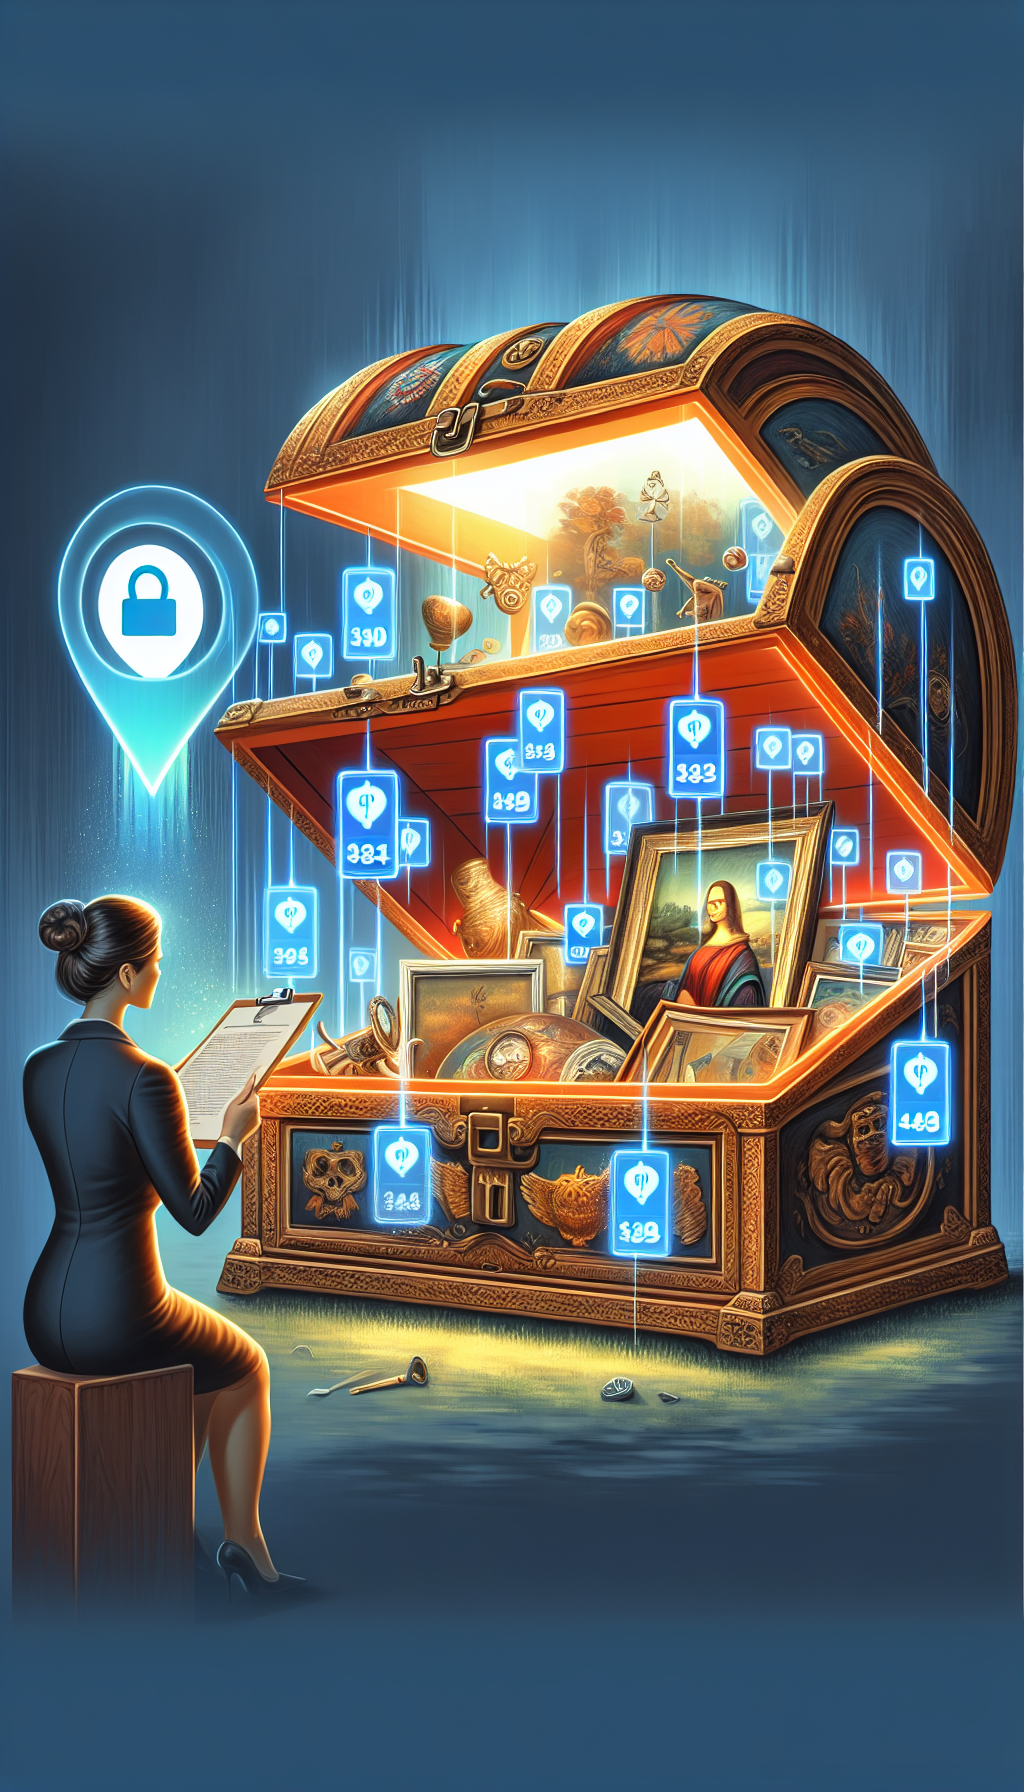 An illustration depicts an open, ornate treasure chest overflowing with classic and contemporary art pieces, each tagged with glowing digital price tags. A protective glass shield, symbolizing insurance, envelopes the chest. Peering through a magnifying glass that doubles as a location pin is an appraiser with a discerning eye, emphasizing the proximity and necessity of expert art appraisal.